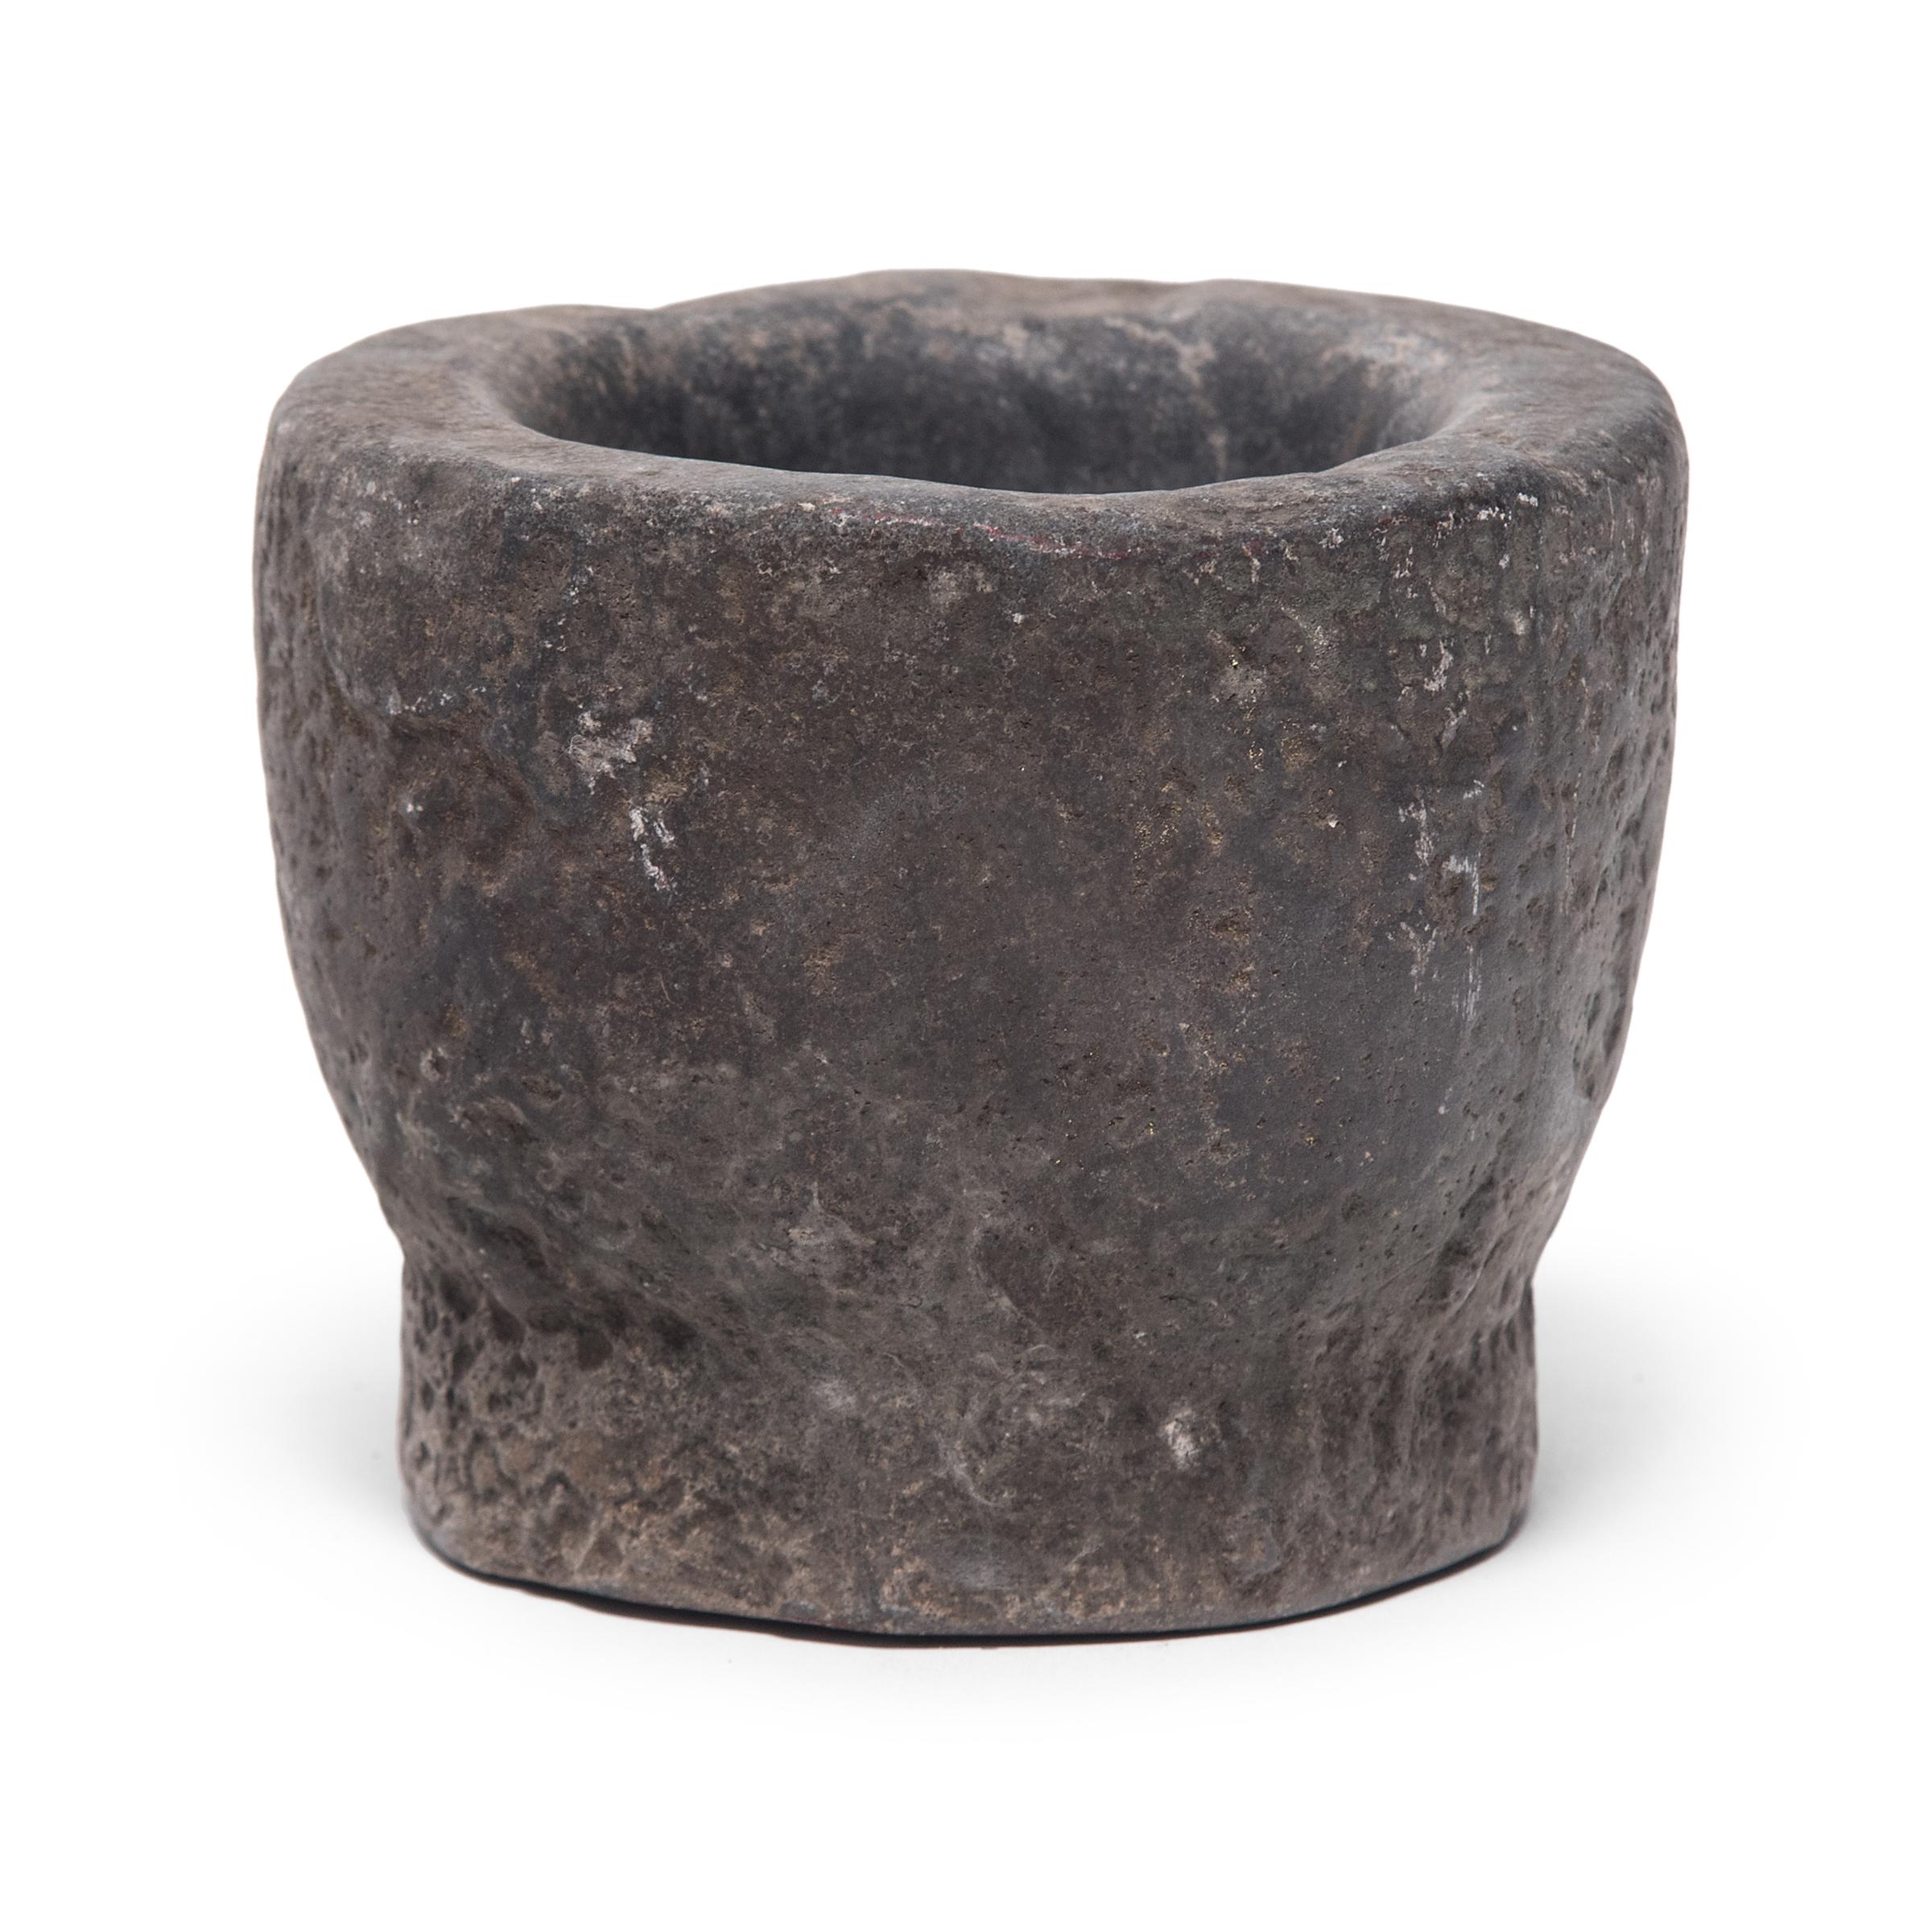 Hand carved from a single block of limestone, this round stone vessel is an early 20th century mortar once used daily in a provincial kitchen to grind herbs, spices, and other foods. Used as a decorative vessel or tabletop planter, the mortar's